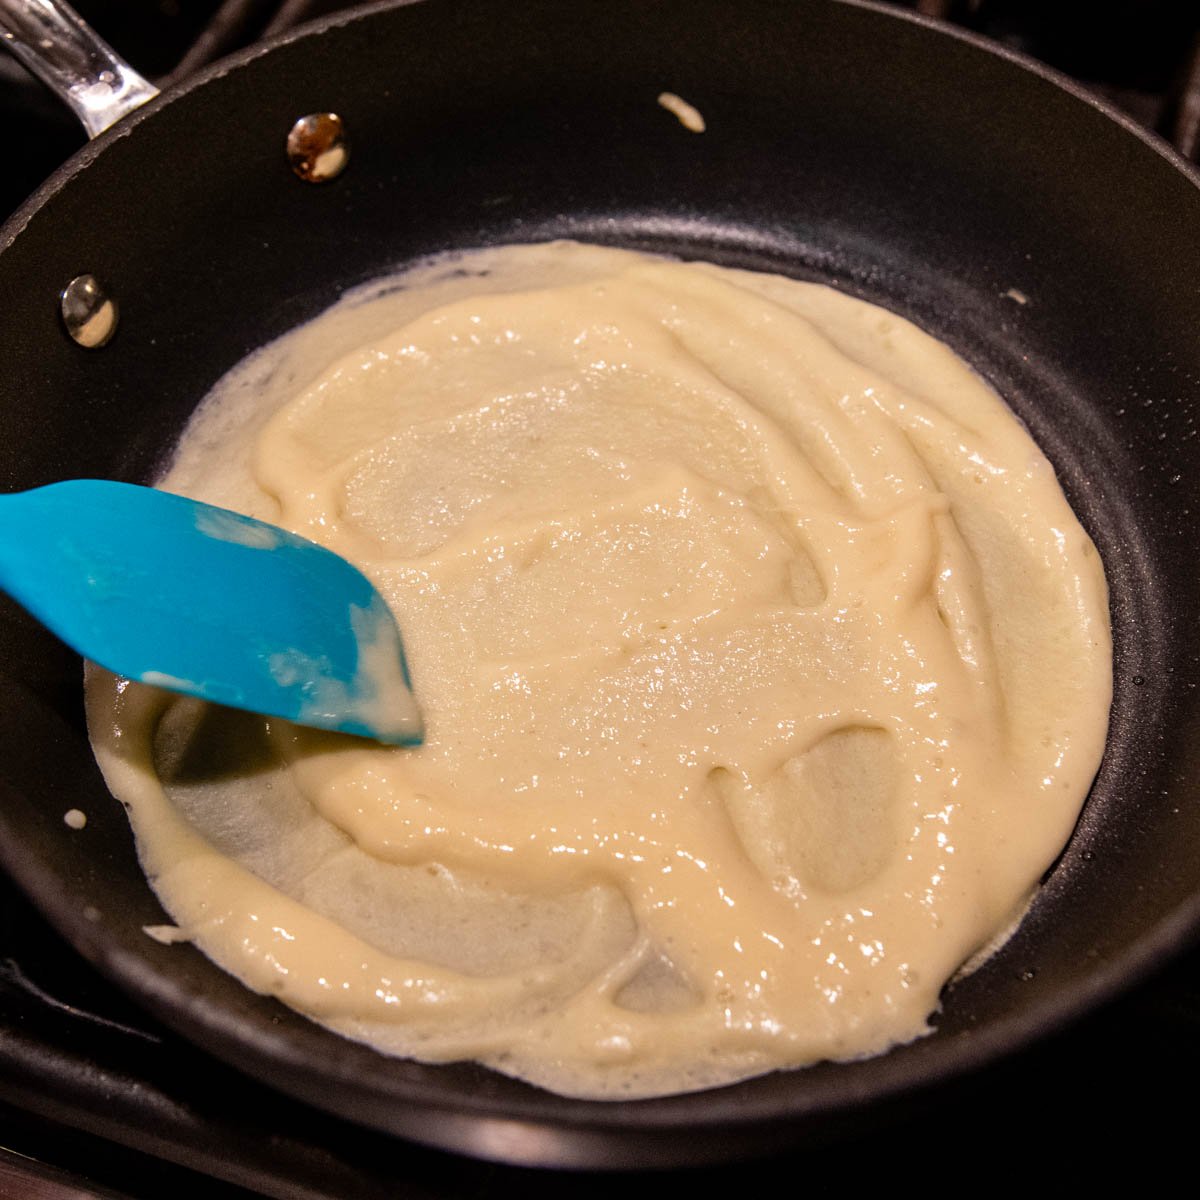 the batter being spread in a small skillet.